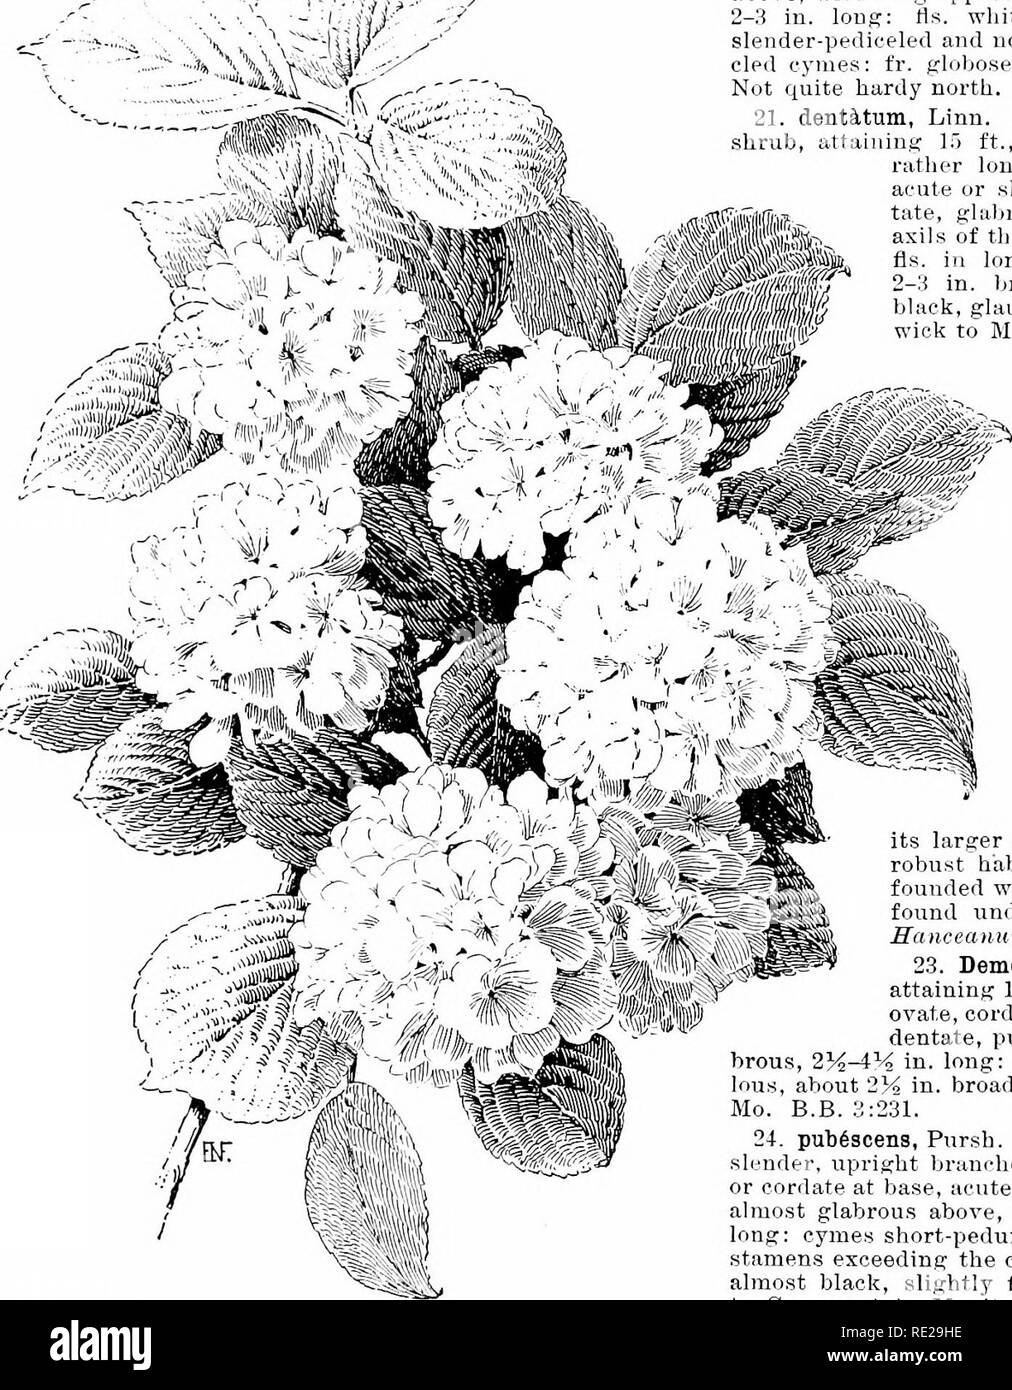 . Cyclopedia of American horticulture, comprising suggestions for cultivation of horticultural plants, descriptions of the species of fruits, vegetables, flowers, and ornamental plants sold in the United States and Canada, together with geographical and biographical sketches. Gardening. 1926 VIBURNUM VIBURNUM 17. Jap6nicuin, Spreng. ( I'. marrophijUifm, Blume). Upn;:rbt .shrub, to 6 ft., with ghihrous hrauchey; Ivs, broadly or rhombic - ovate to obIony;-ovate, acute or shortly acuminate, remotely dentate except at the base, 3-G iu. long: fls. in short-peduncled, glabrous cymes 2-4 in. broad: f Stock Photo